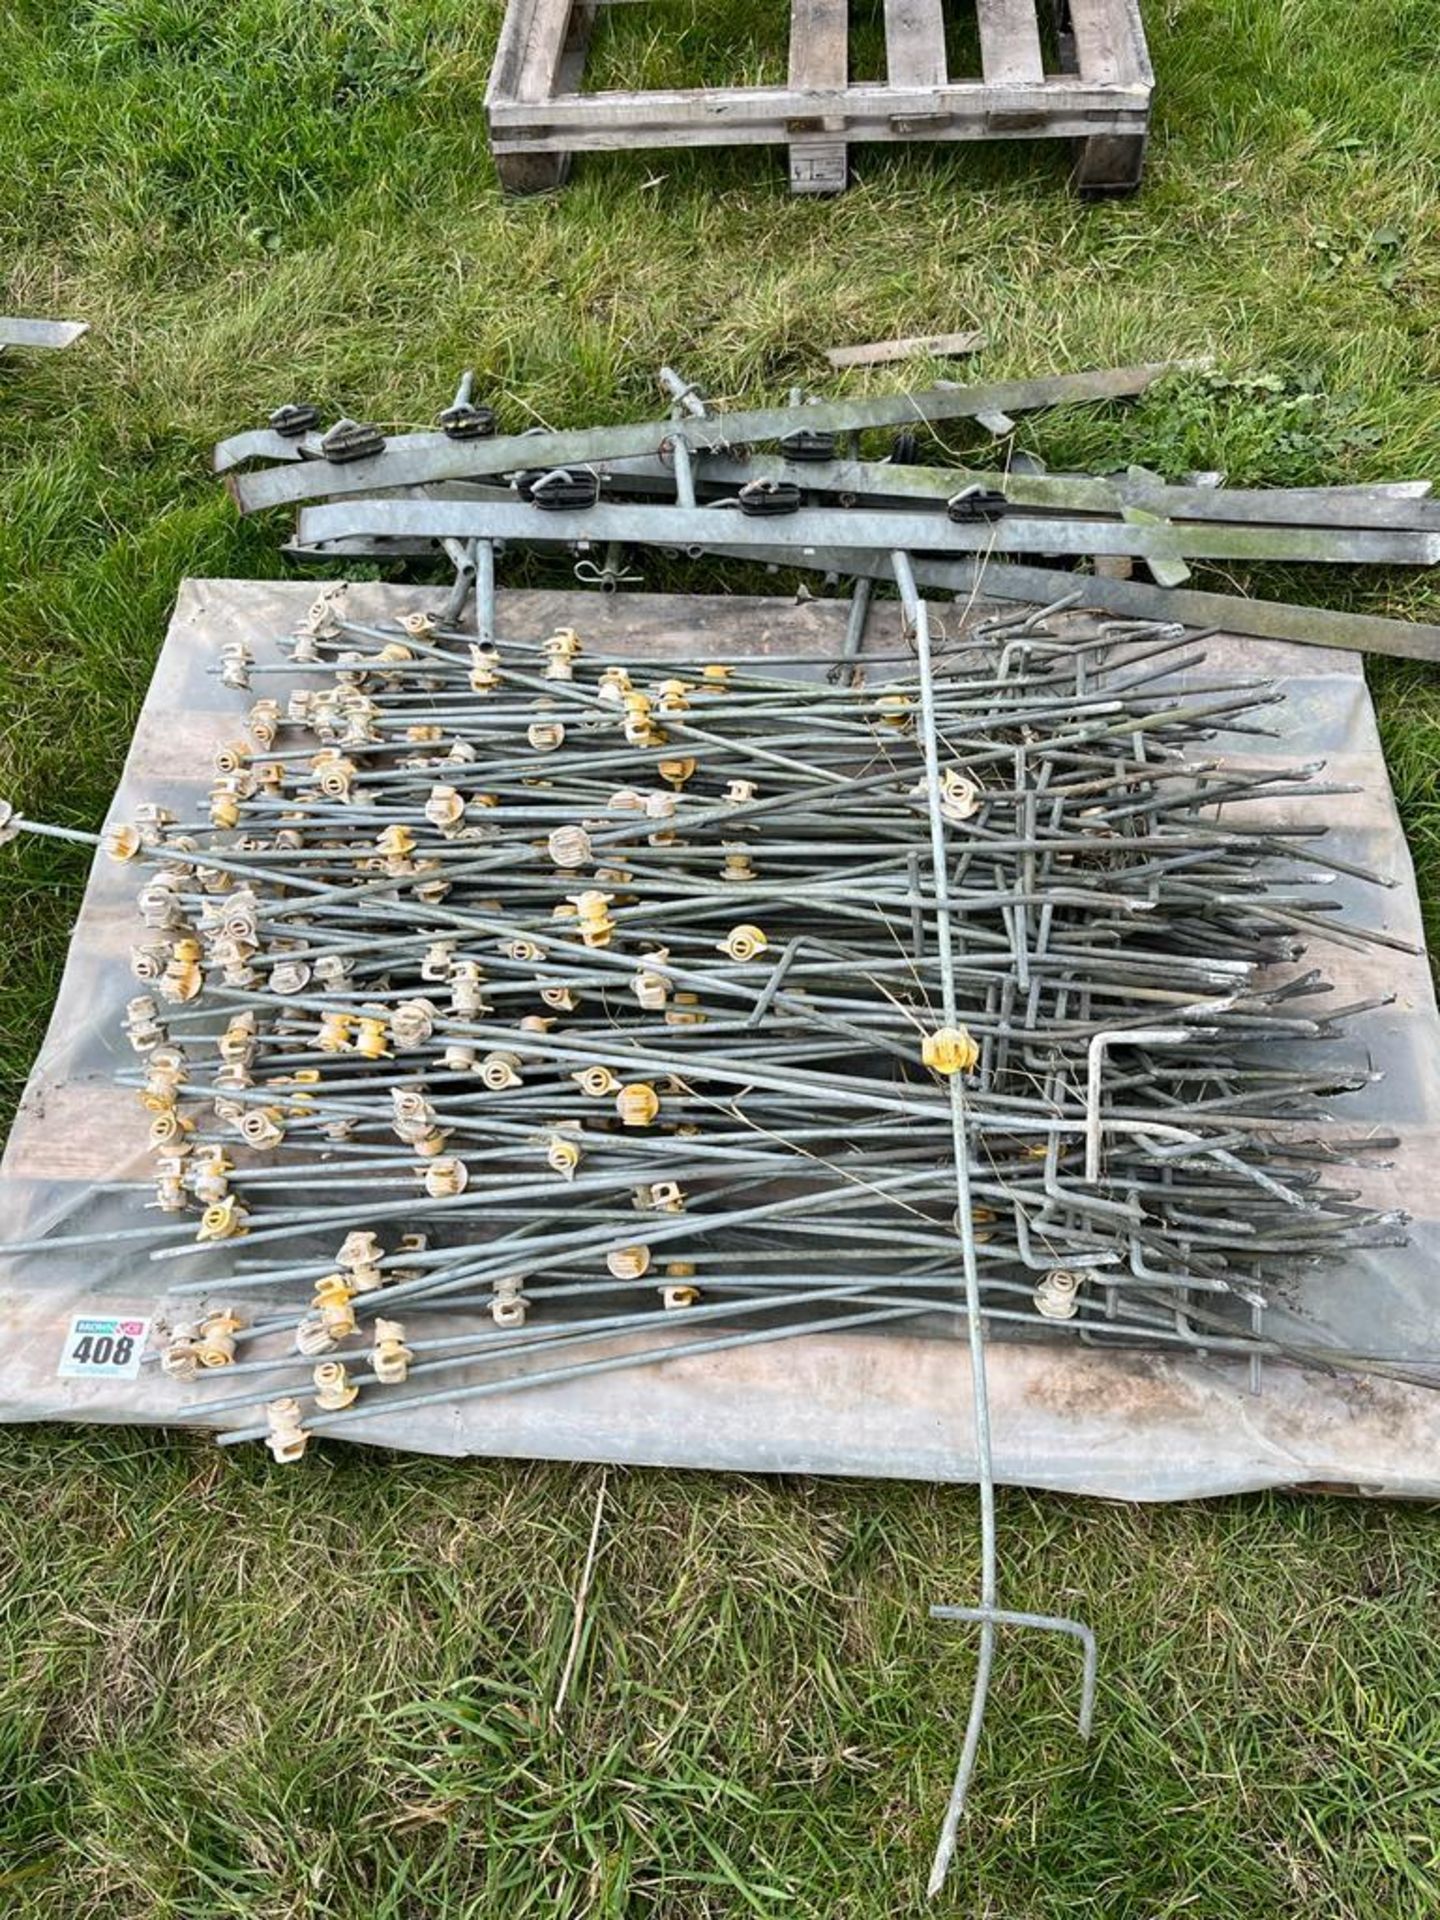 100No. Galvanised Electric Fence Stakes c/w Corner & Reel Posts - Image 2 of 2